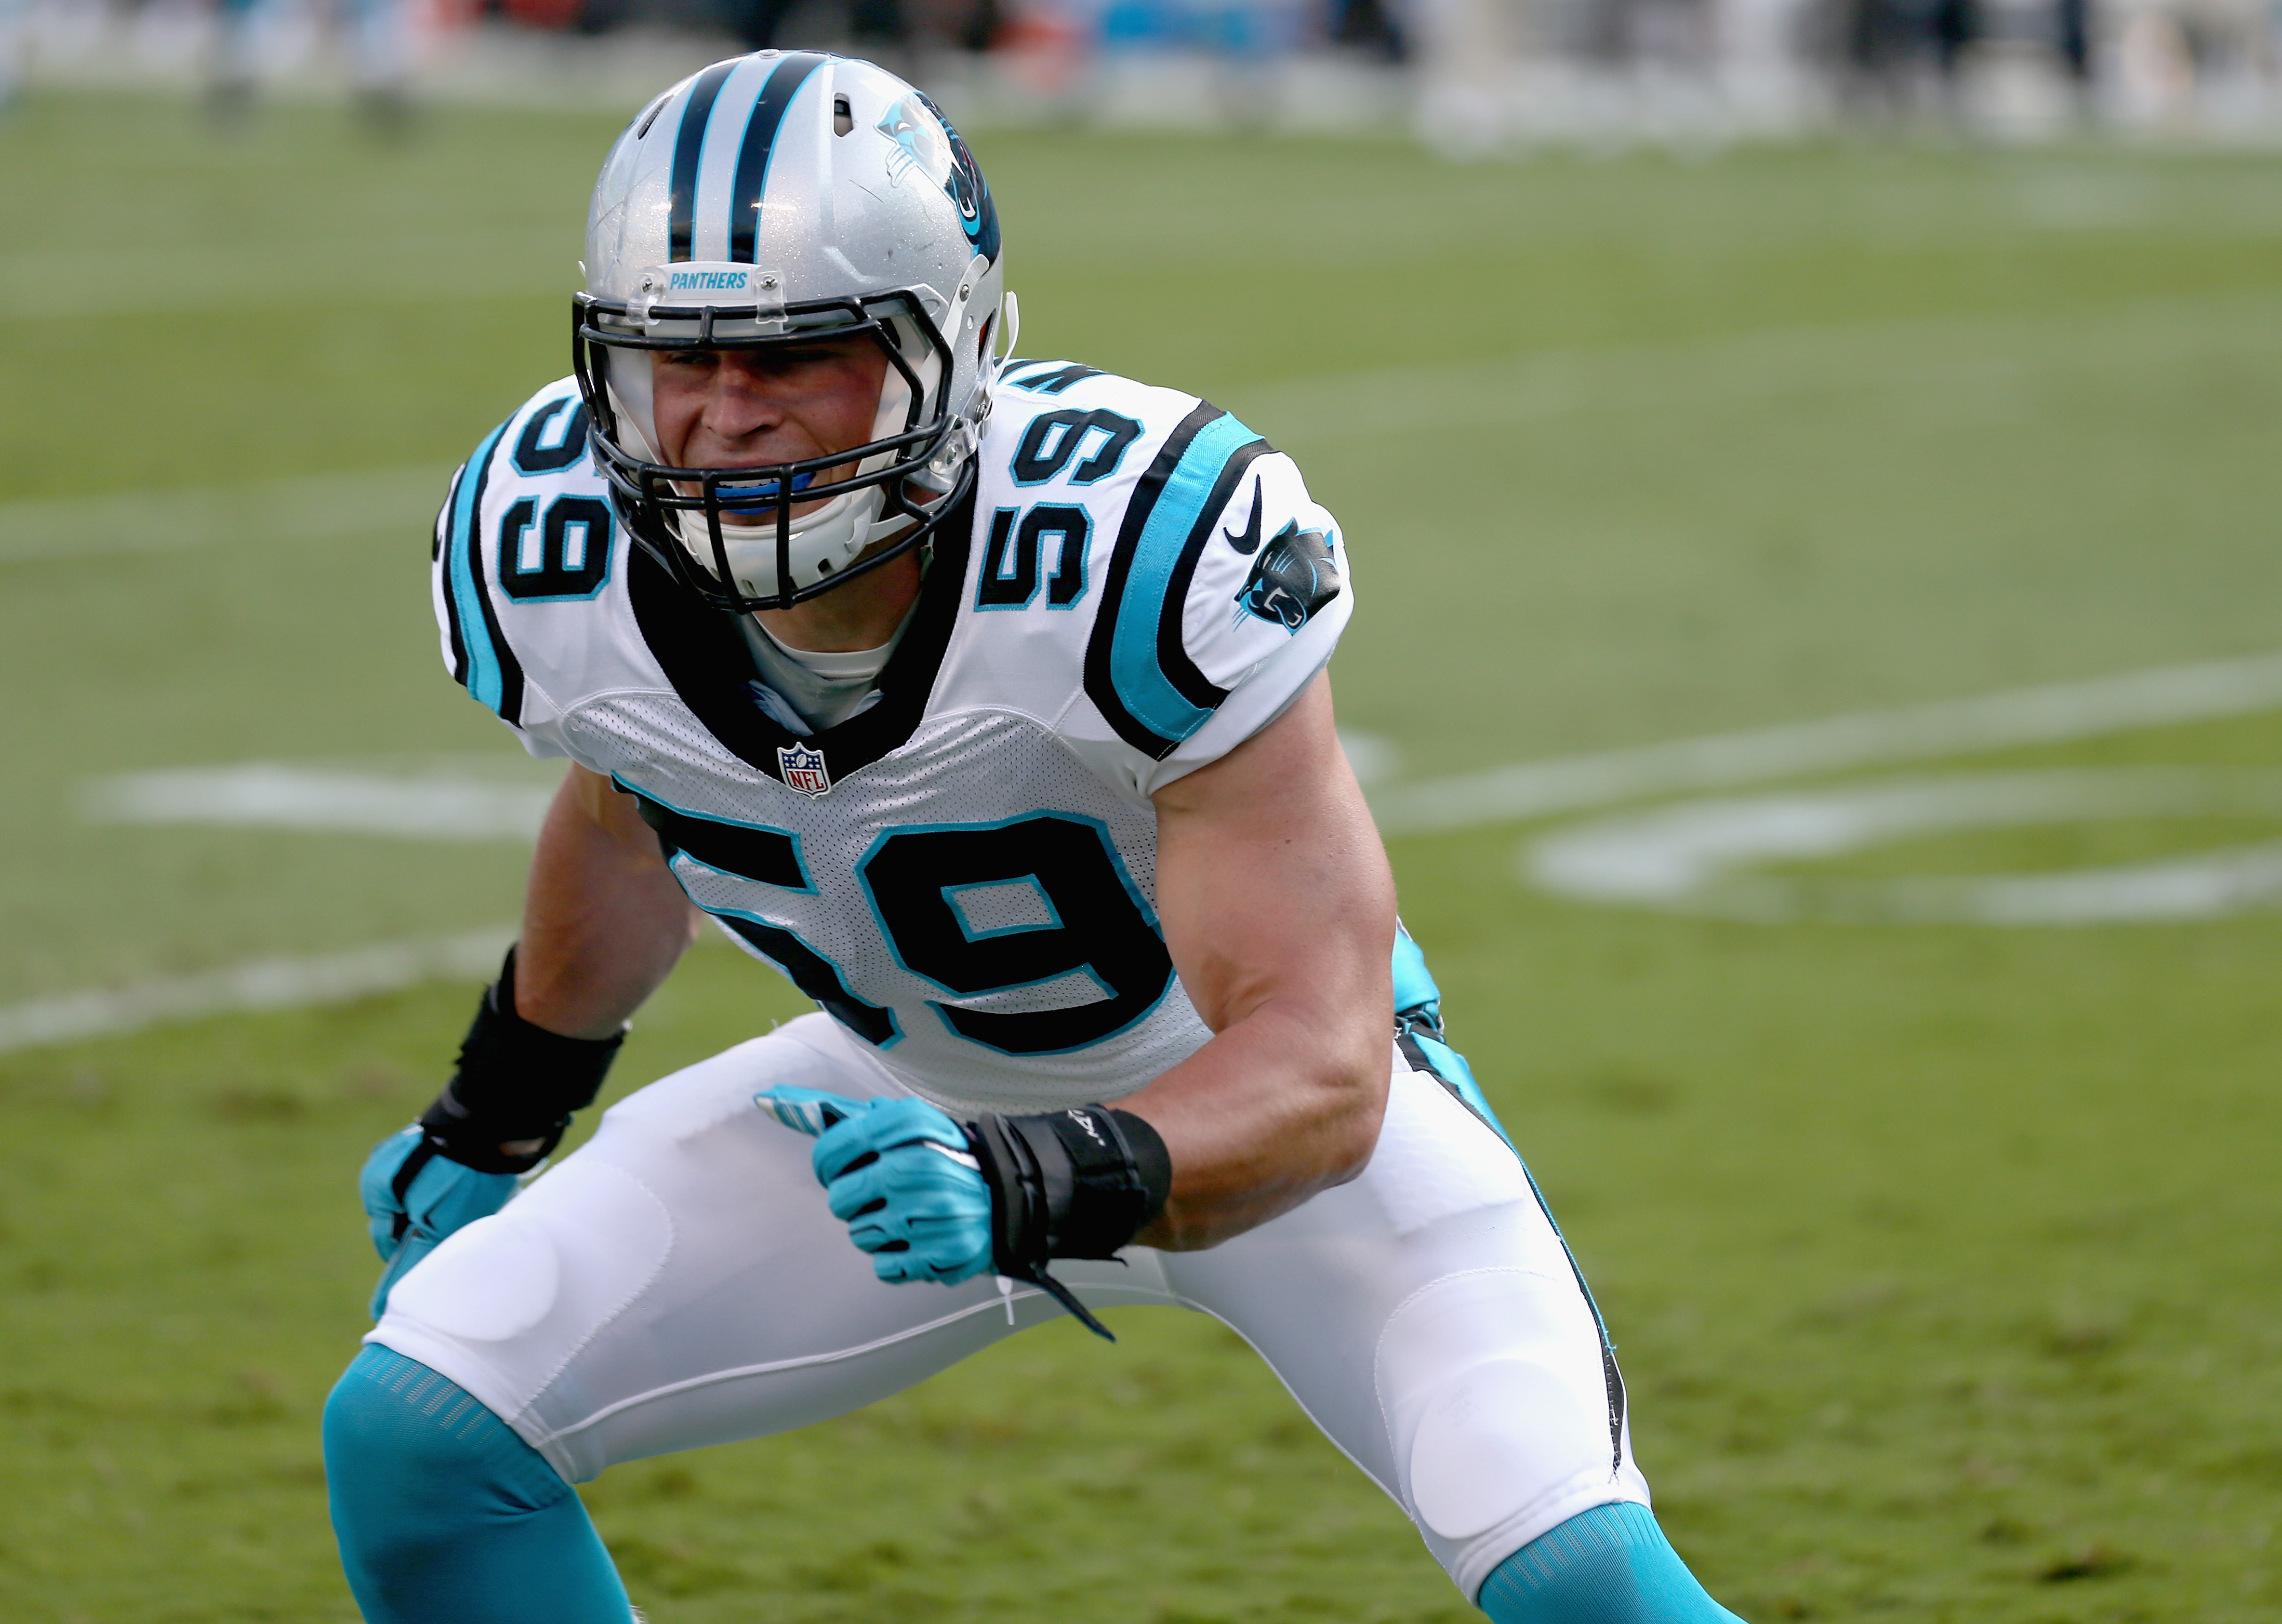 Luke Kuechly is the heart of the Panthers defense, but has been sidelined after a nasty collision  (Getty).